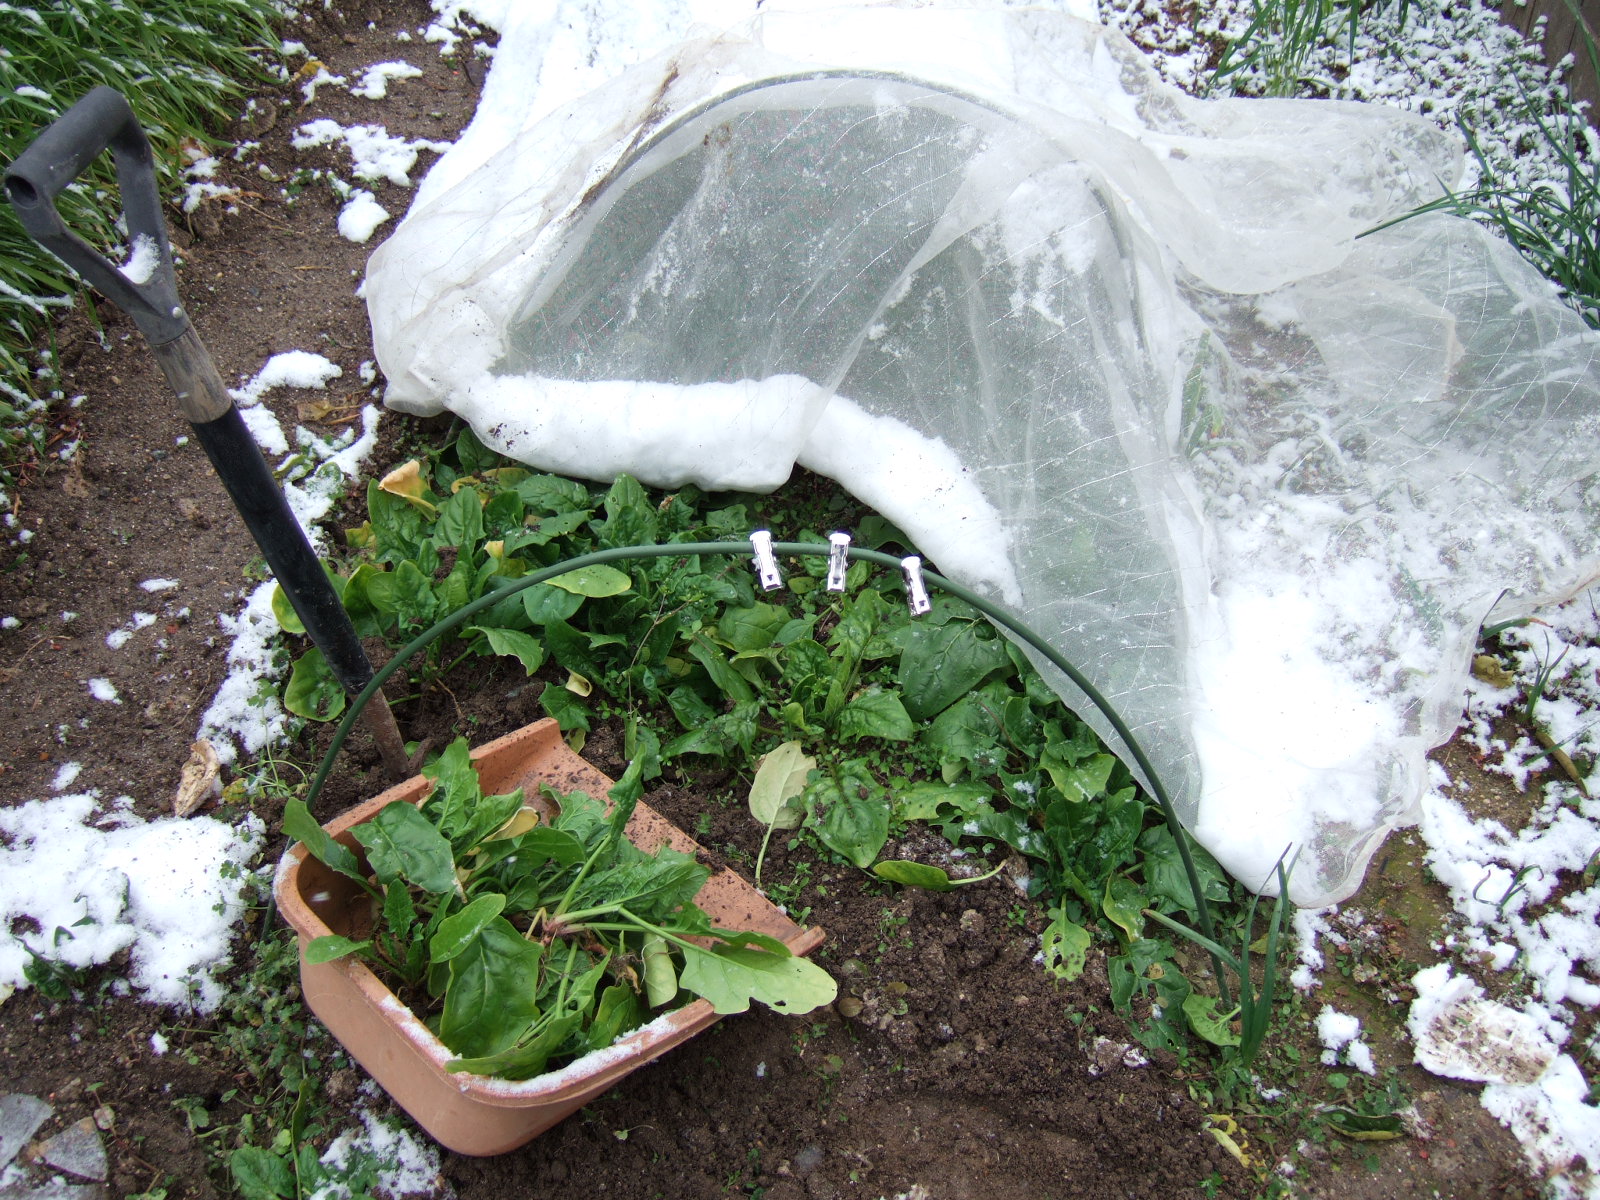 The net covering of a row of spinach is thrown back to reveal a patch of spinach. A tray beside the row holds a clump of plants dug out of the mud, and the garden fork used for the digging stands beside the tray. The netting thrown back is peppered with snow.